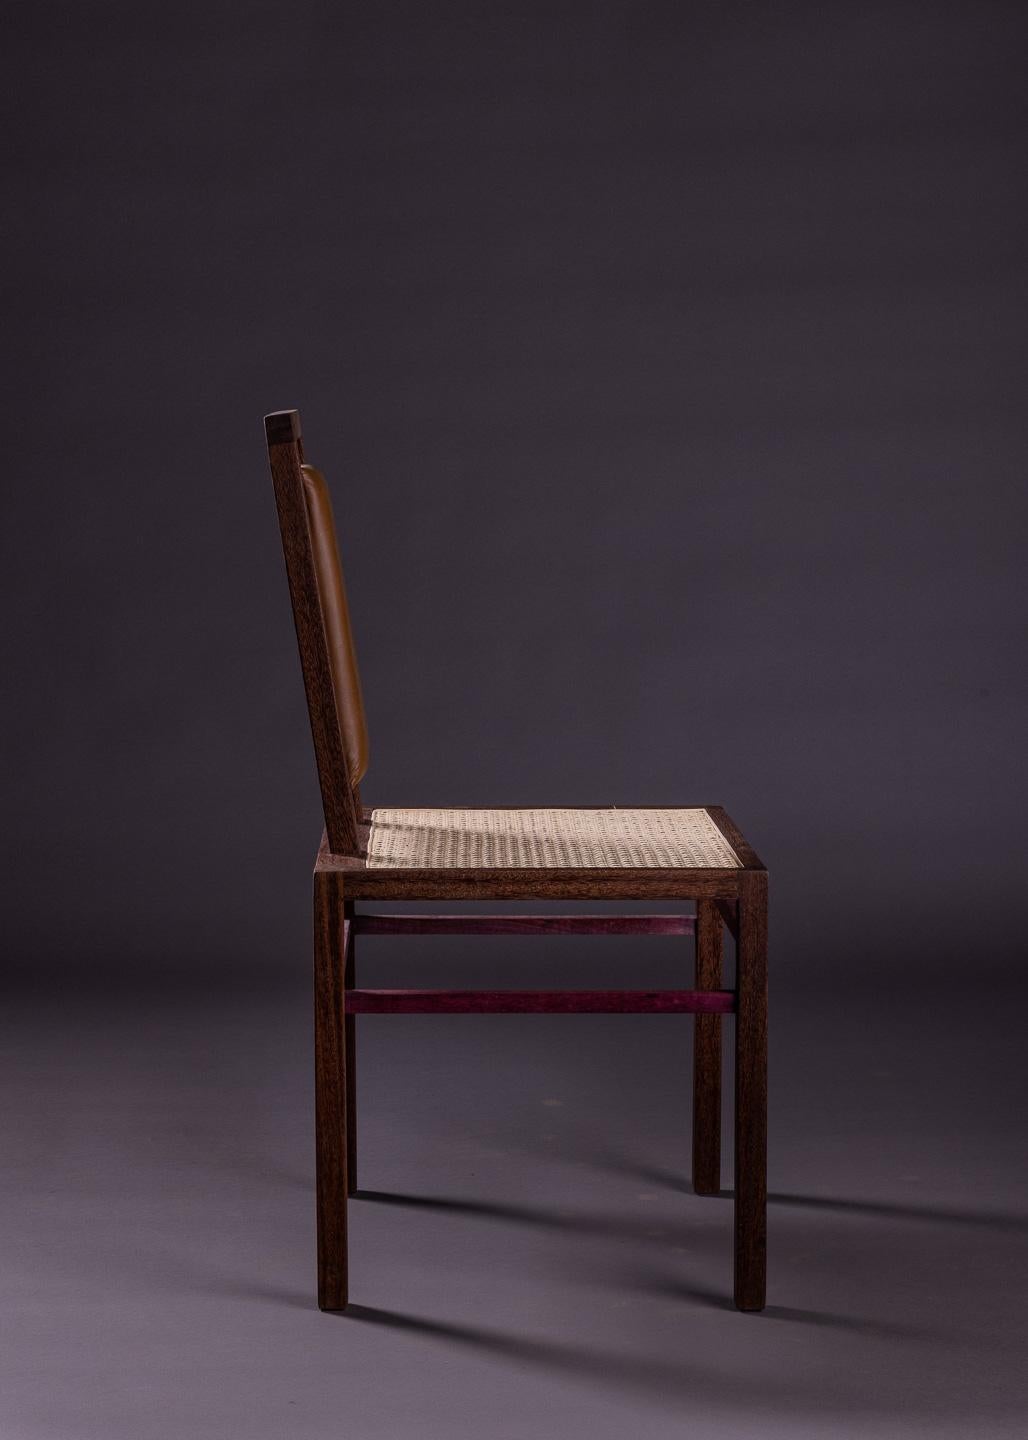 Hand-Crafted The Eccentric Chair, Solid Sucupira Wood and Purpleheart Wood For Sale